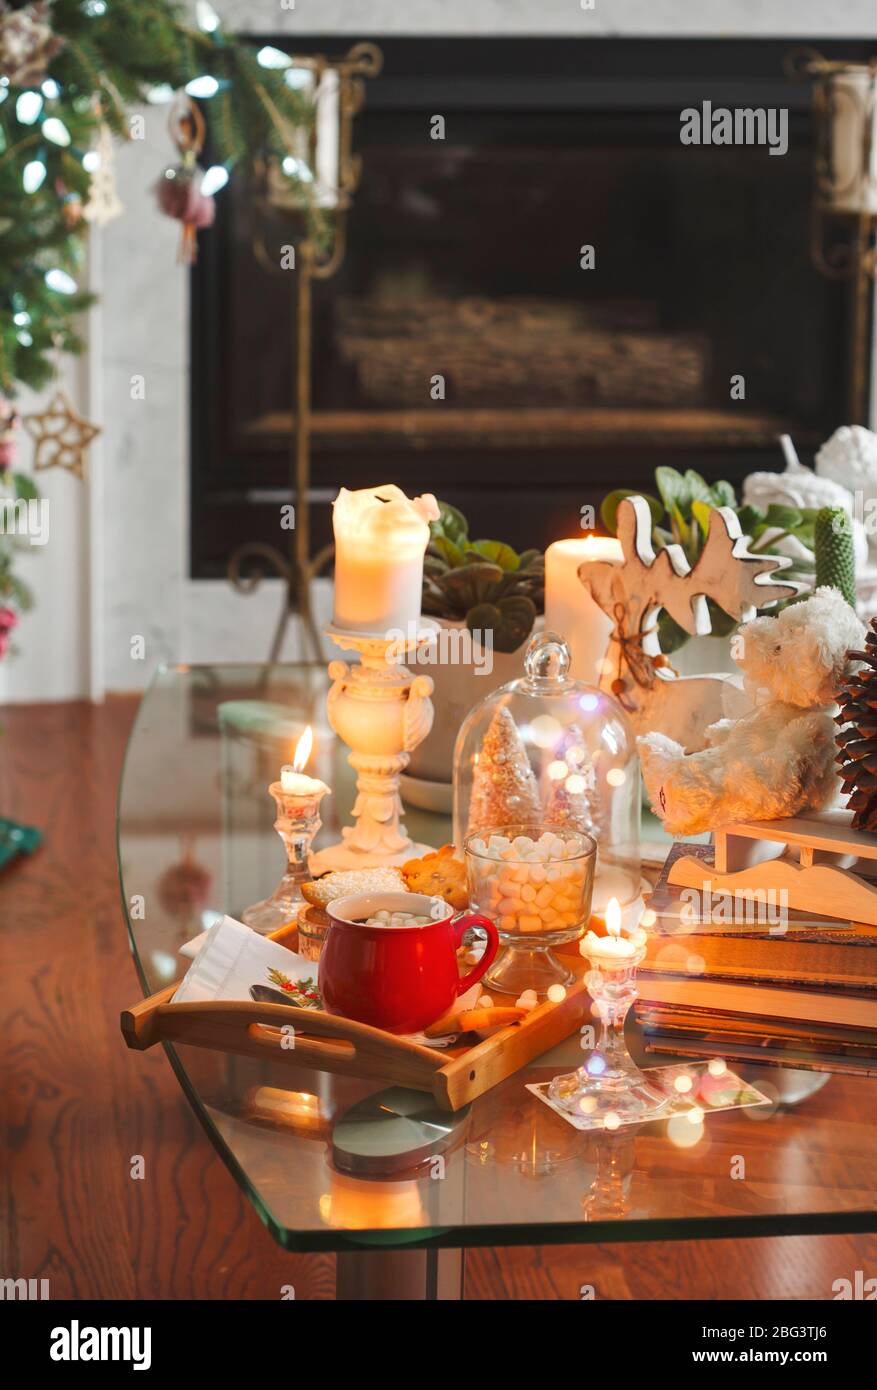 Cup of hot chocolate on a wooden tray on a table at Christmas Stock Photo